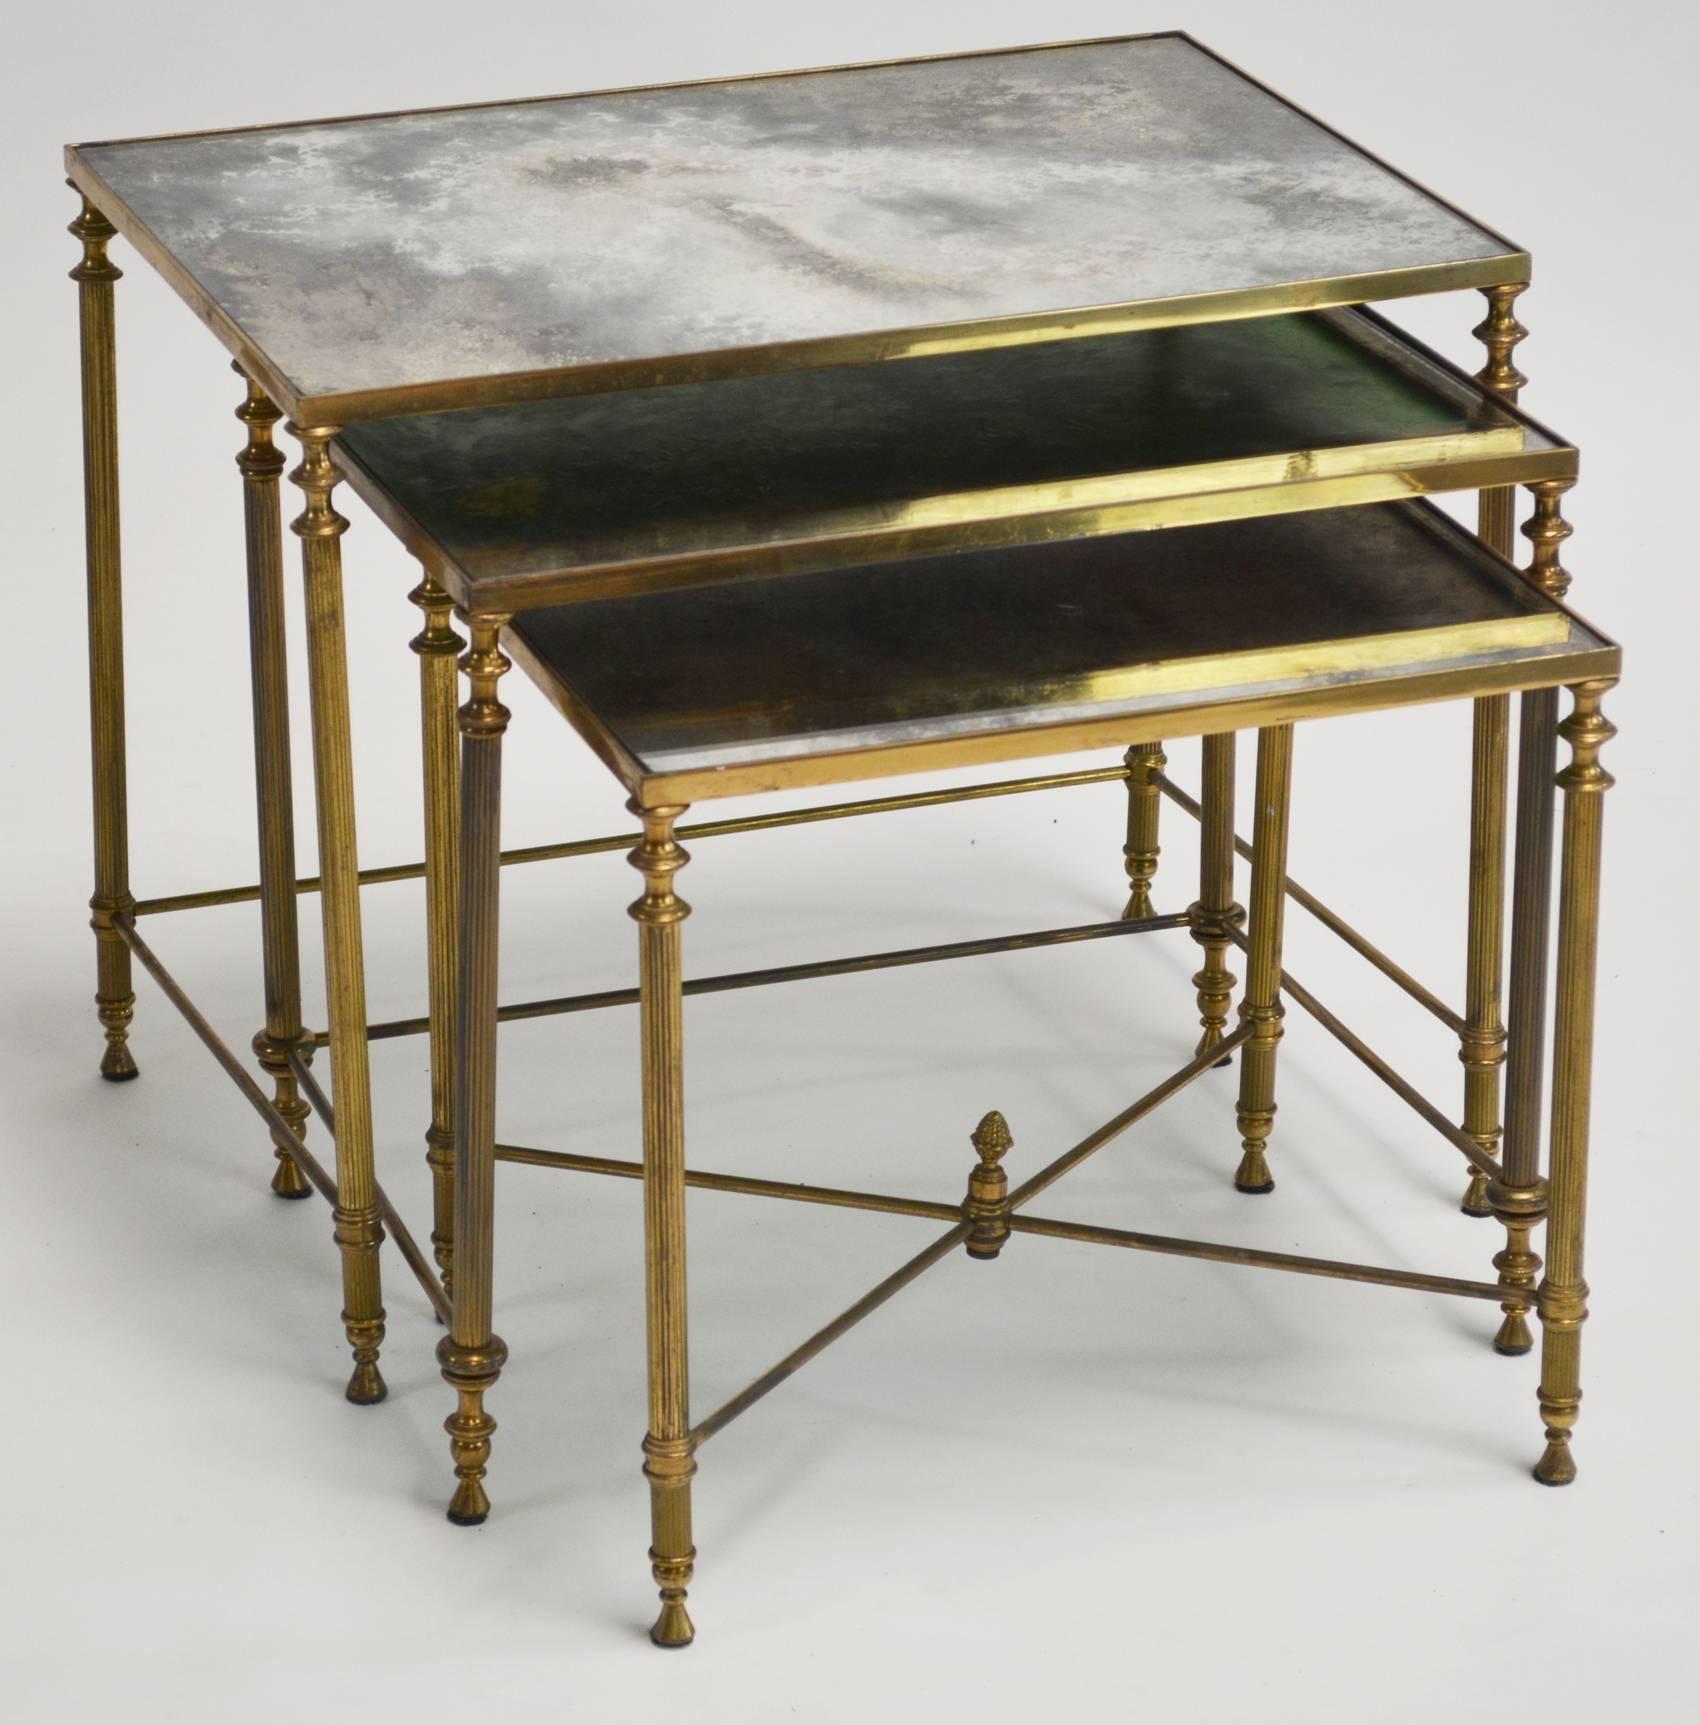 A pair of brass neoclassical nesting tables with original antiqued mirror tops. Typical of French design, possibly Italian, in the style of Baguès and Maison Jansen. Lovely detail, with reeded legs and cast brass finials.